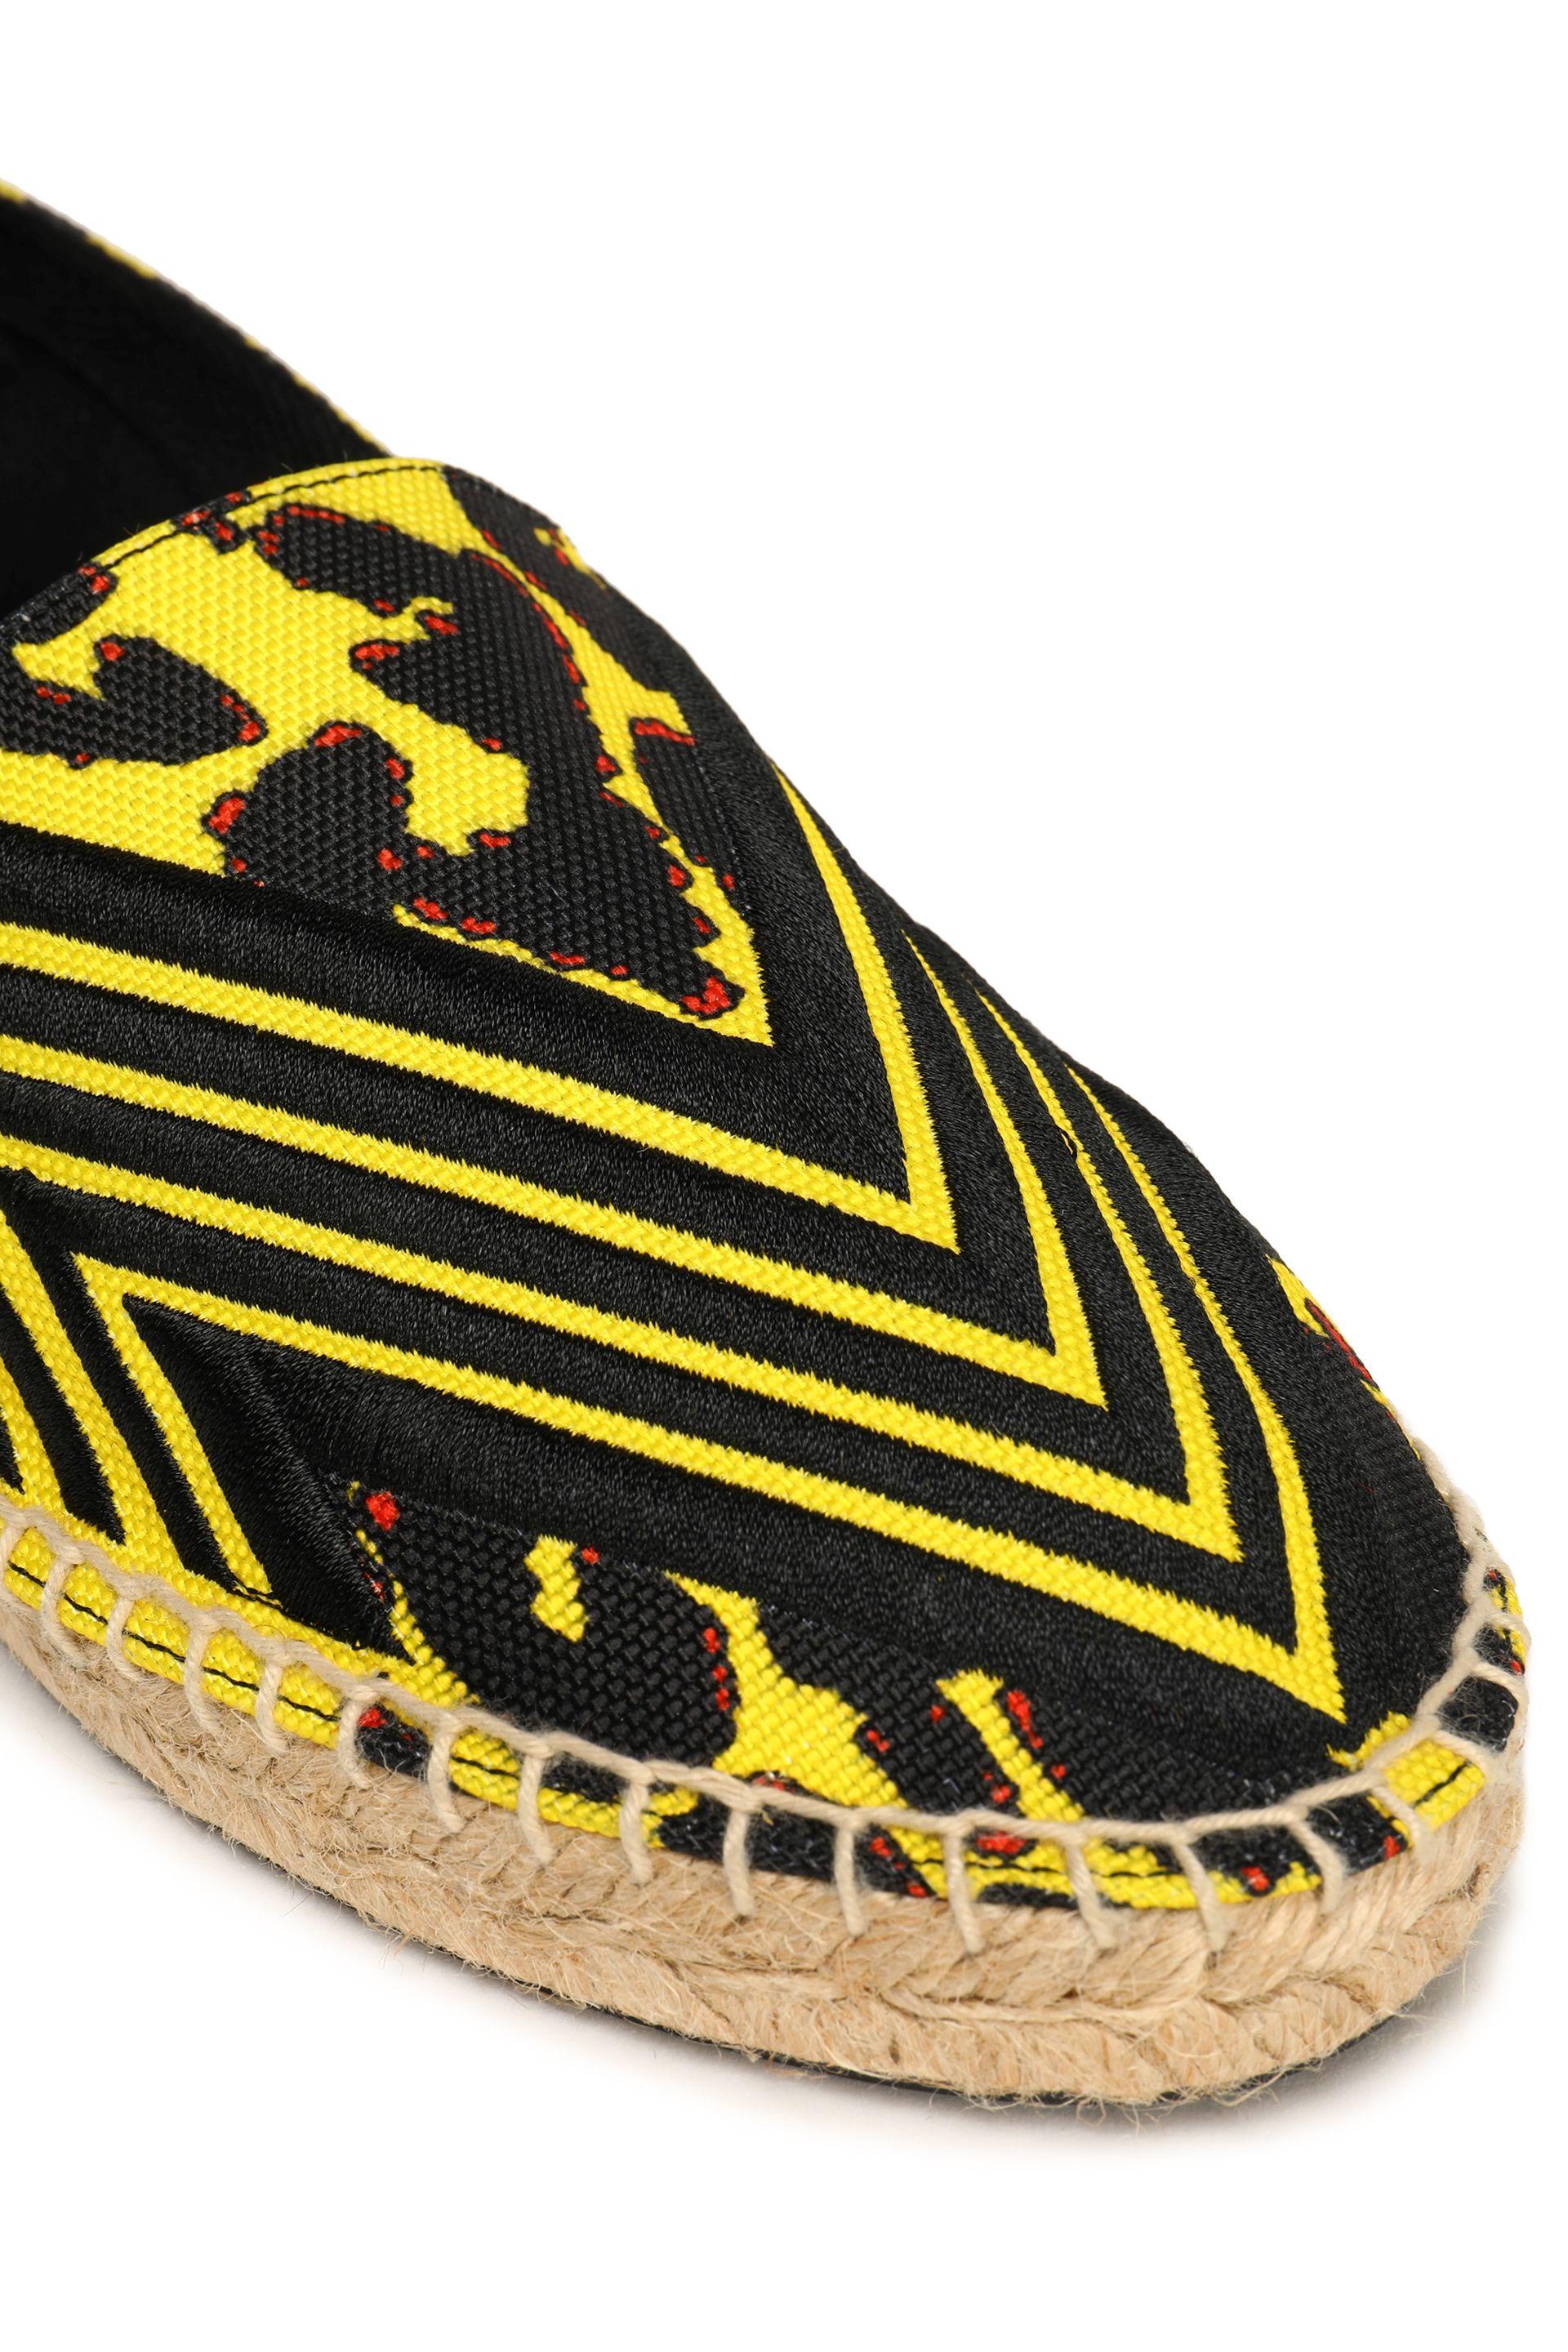 Maje Synthetic Embroidered Printed Canvas Espadrilles Yellow - Lyst